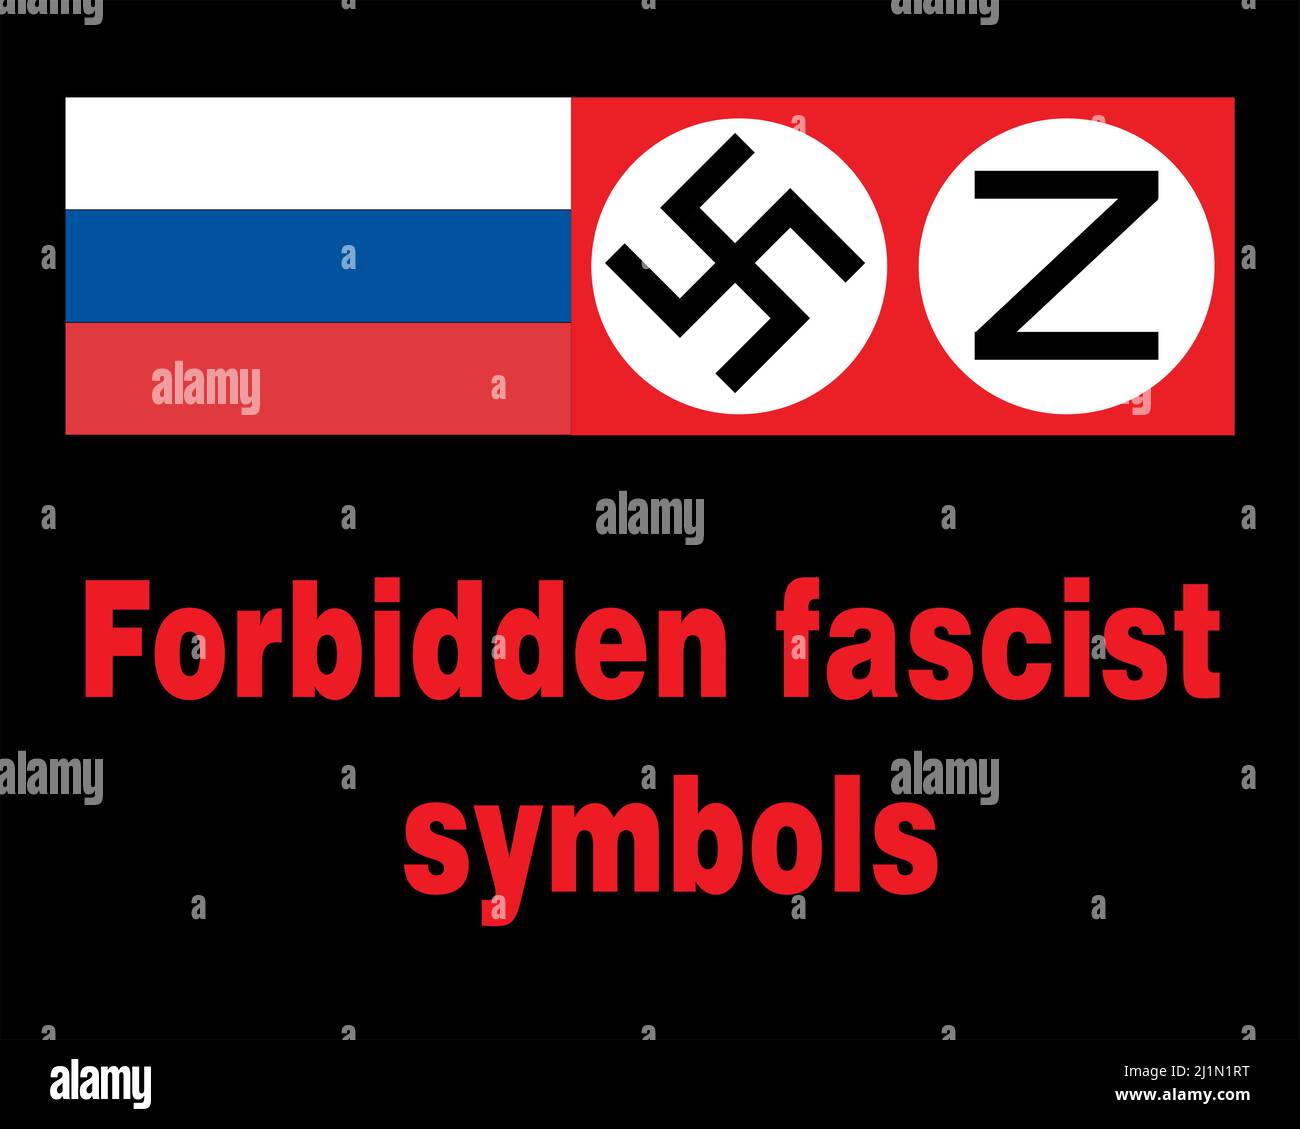 Forbidden fascist symbols on a black background, a swastika next to the letter zed and the Russian flag.  Stock Vector